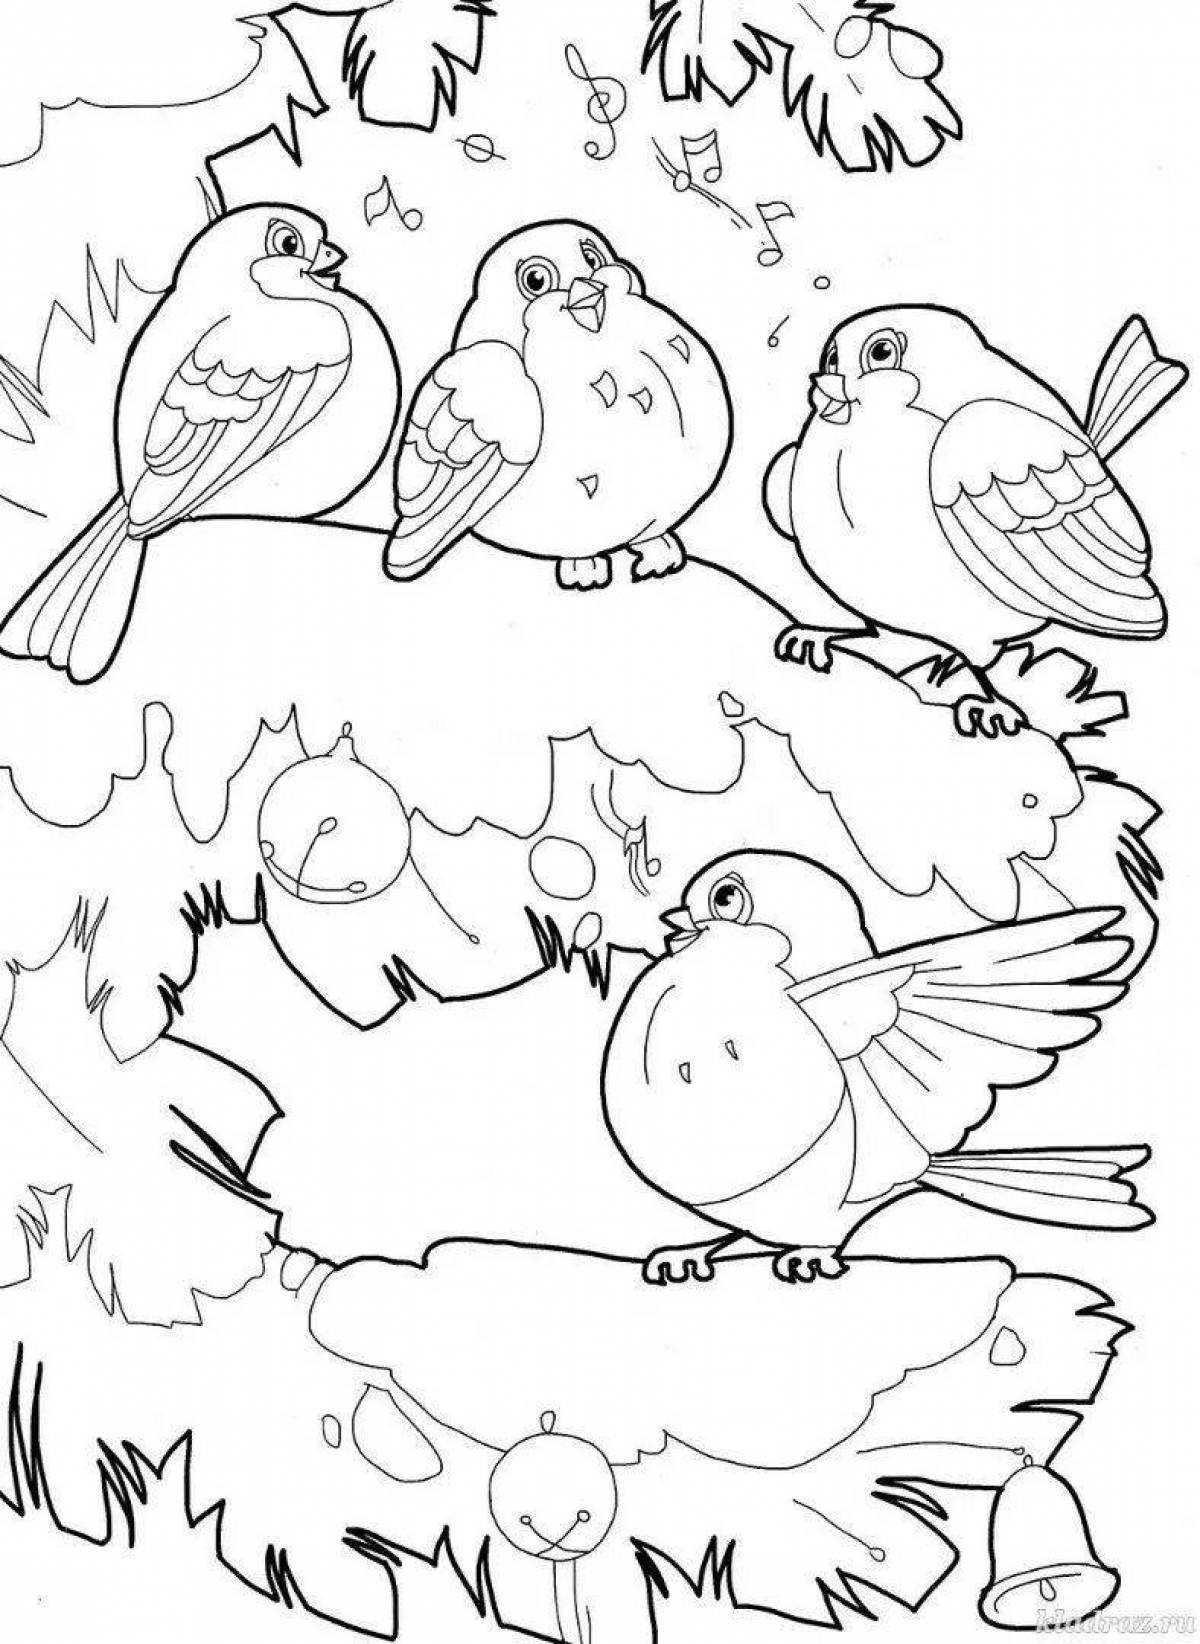 Coloring book radiant bird for grade 1